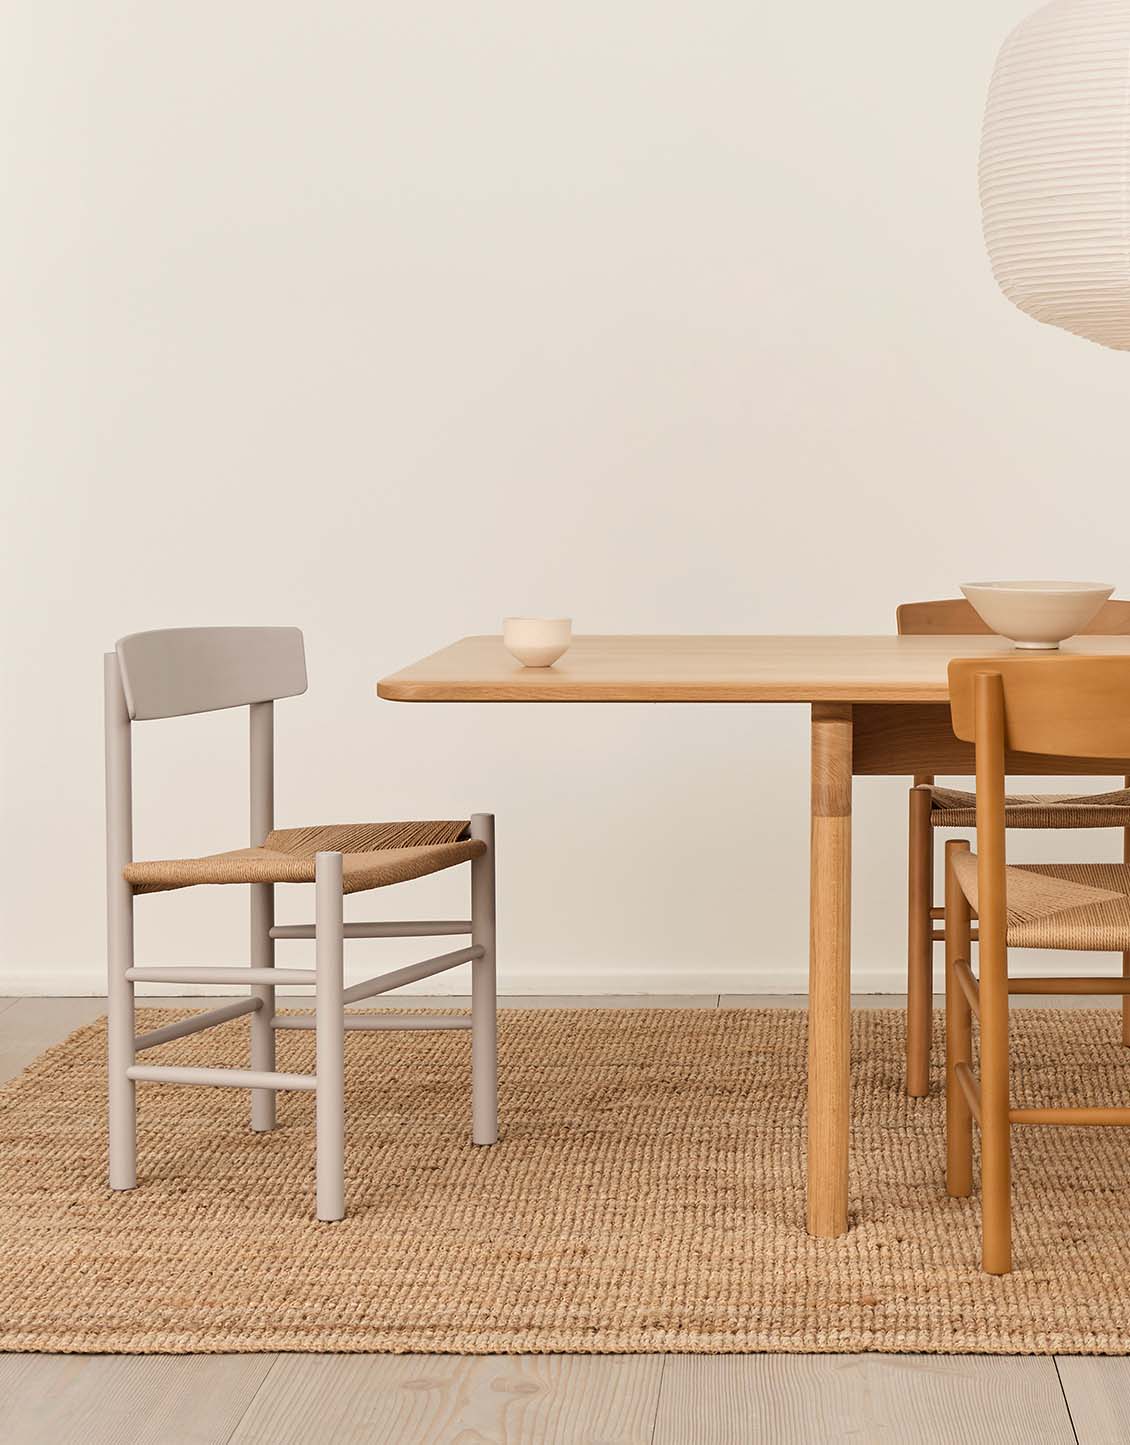 Fredericia J39 Chair by Borge Mogensen